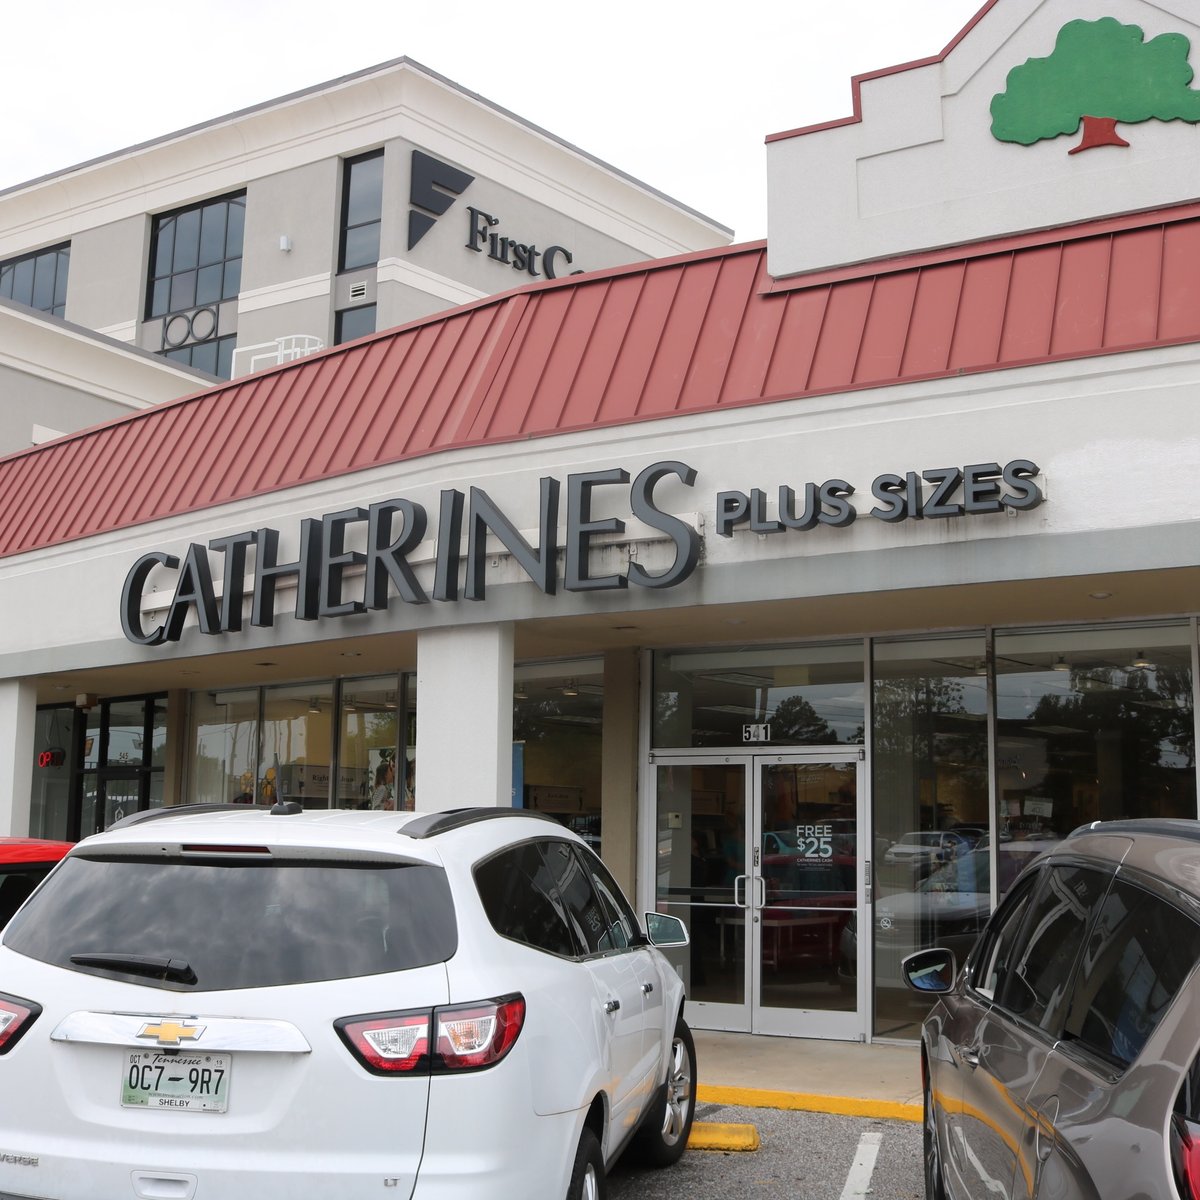 Catherines Plus Sizes debuts new store design at Memphis-area stores -  Memphis Business Journal